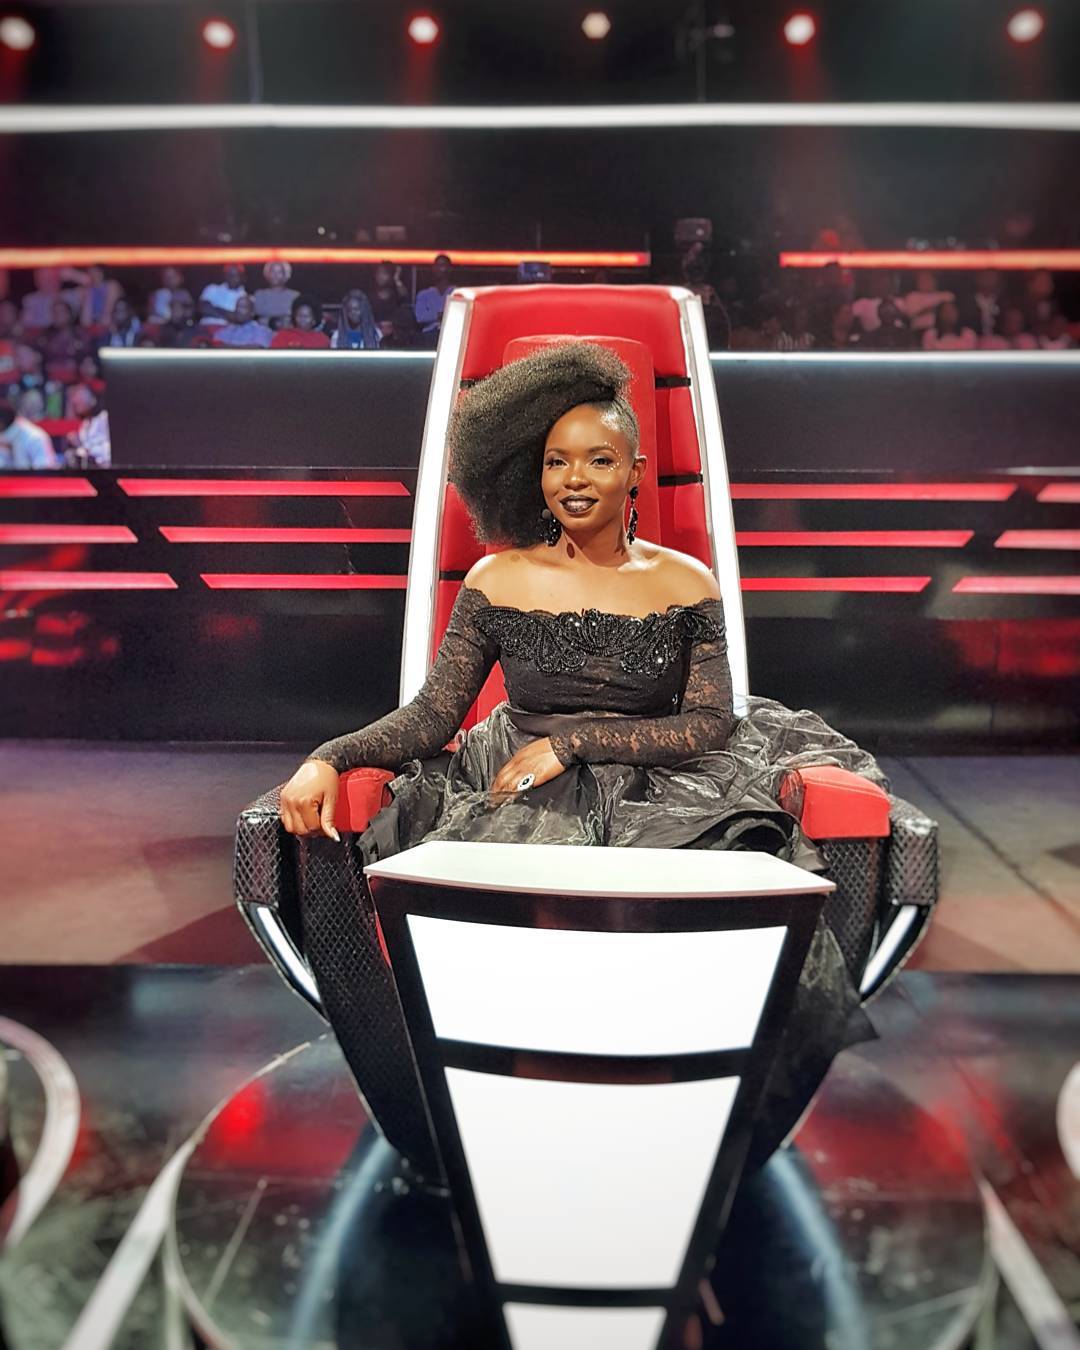 Check Out Yemi Alade's Outfit To The Voice Nigeria Season 2 Finale